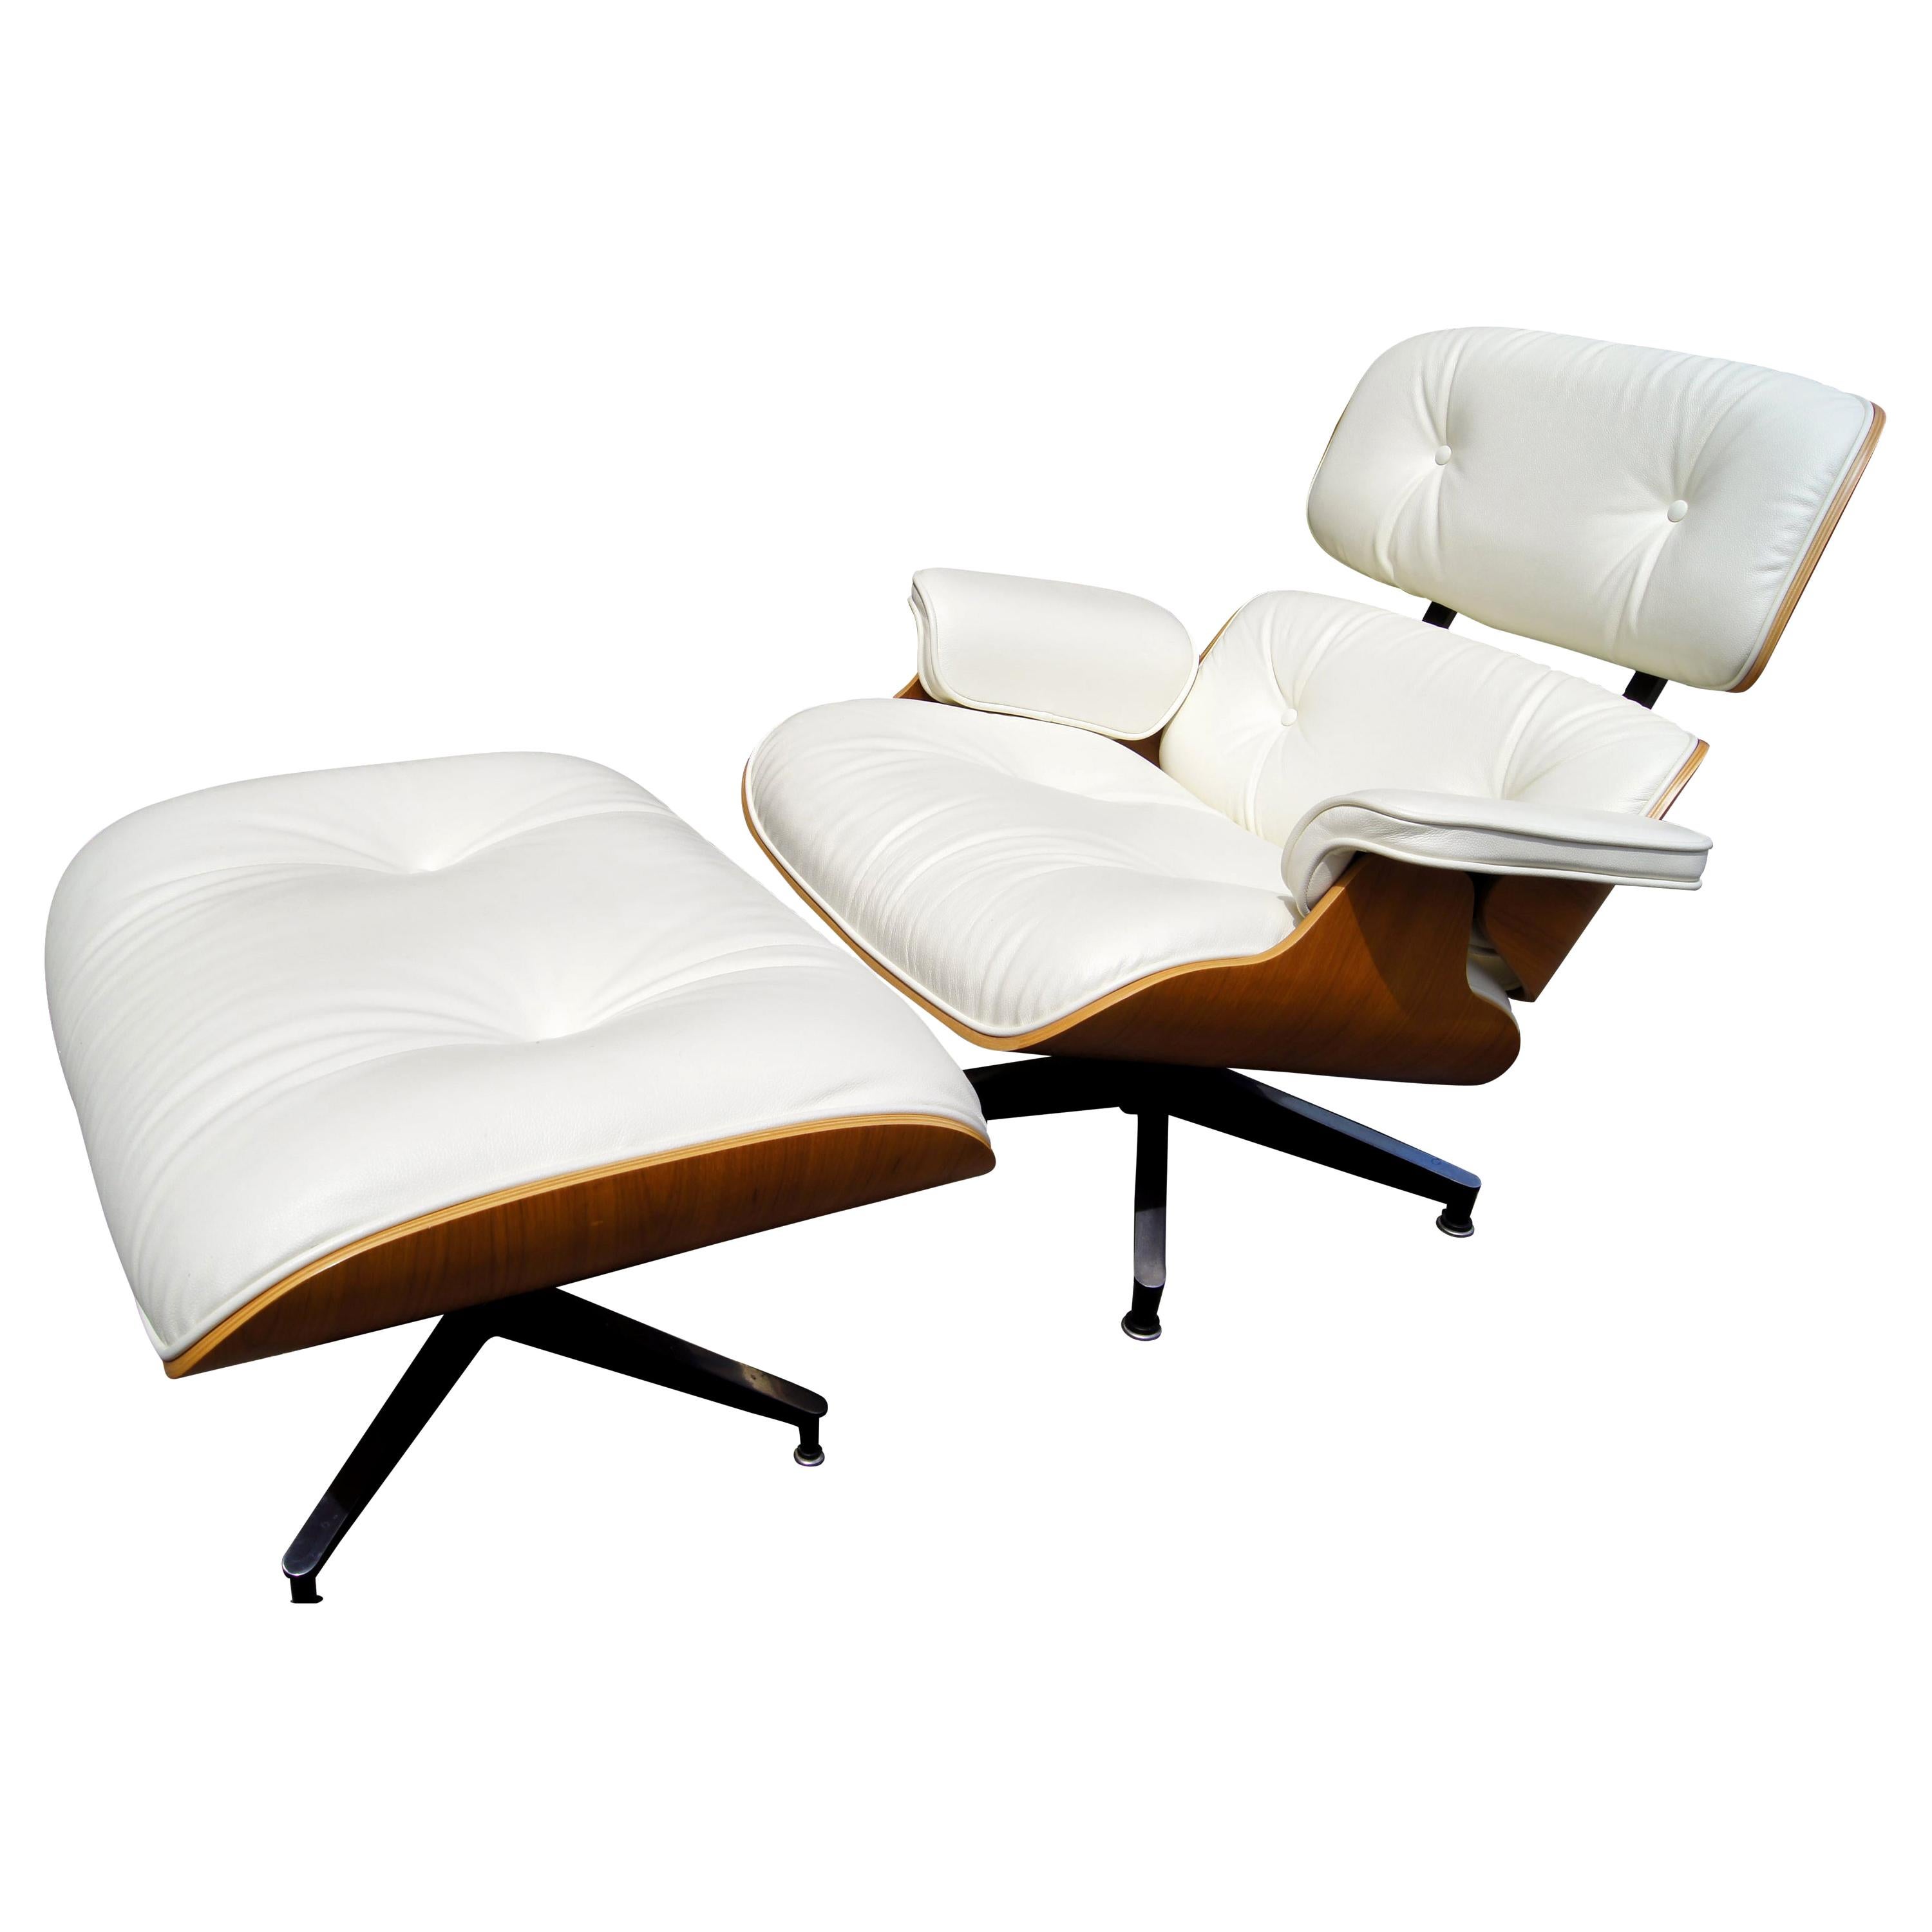 Lounge Chair & Ottoman, Model 670/671, by Charles & Ray Eames for Herman Miller